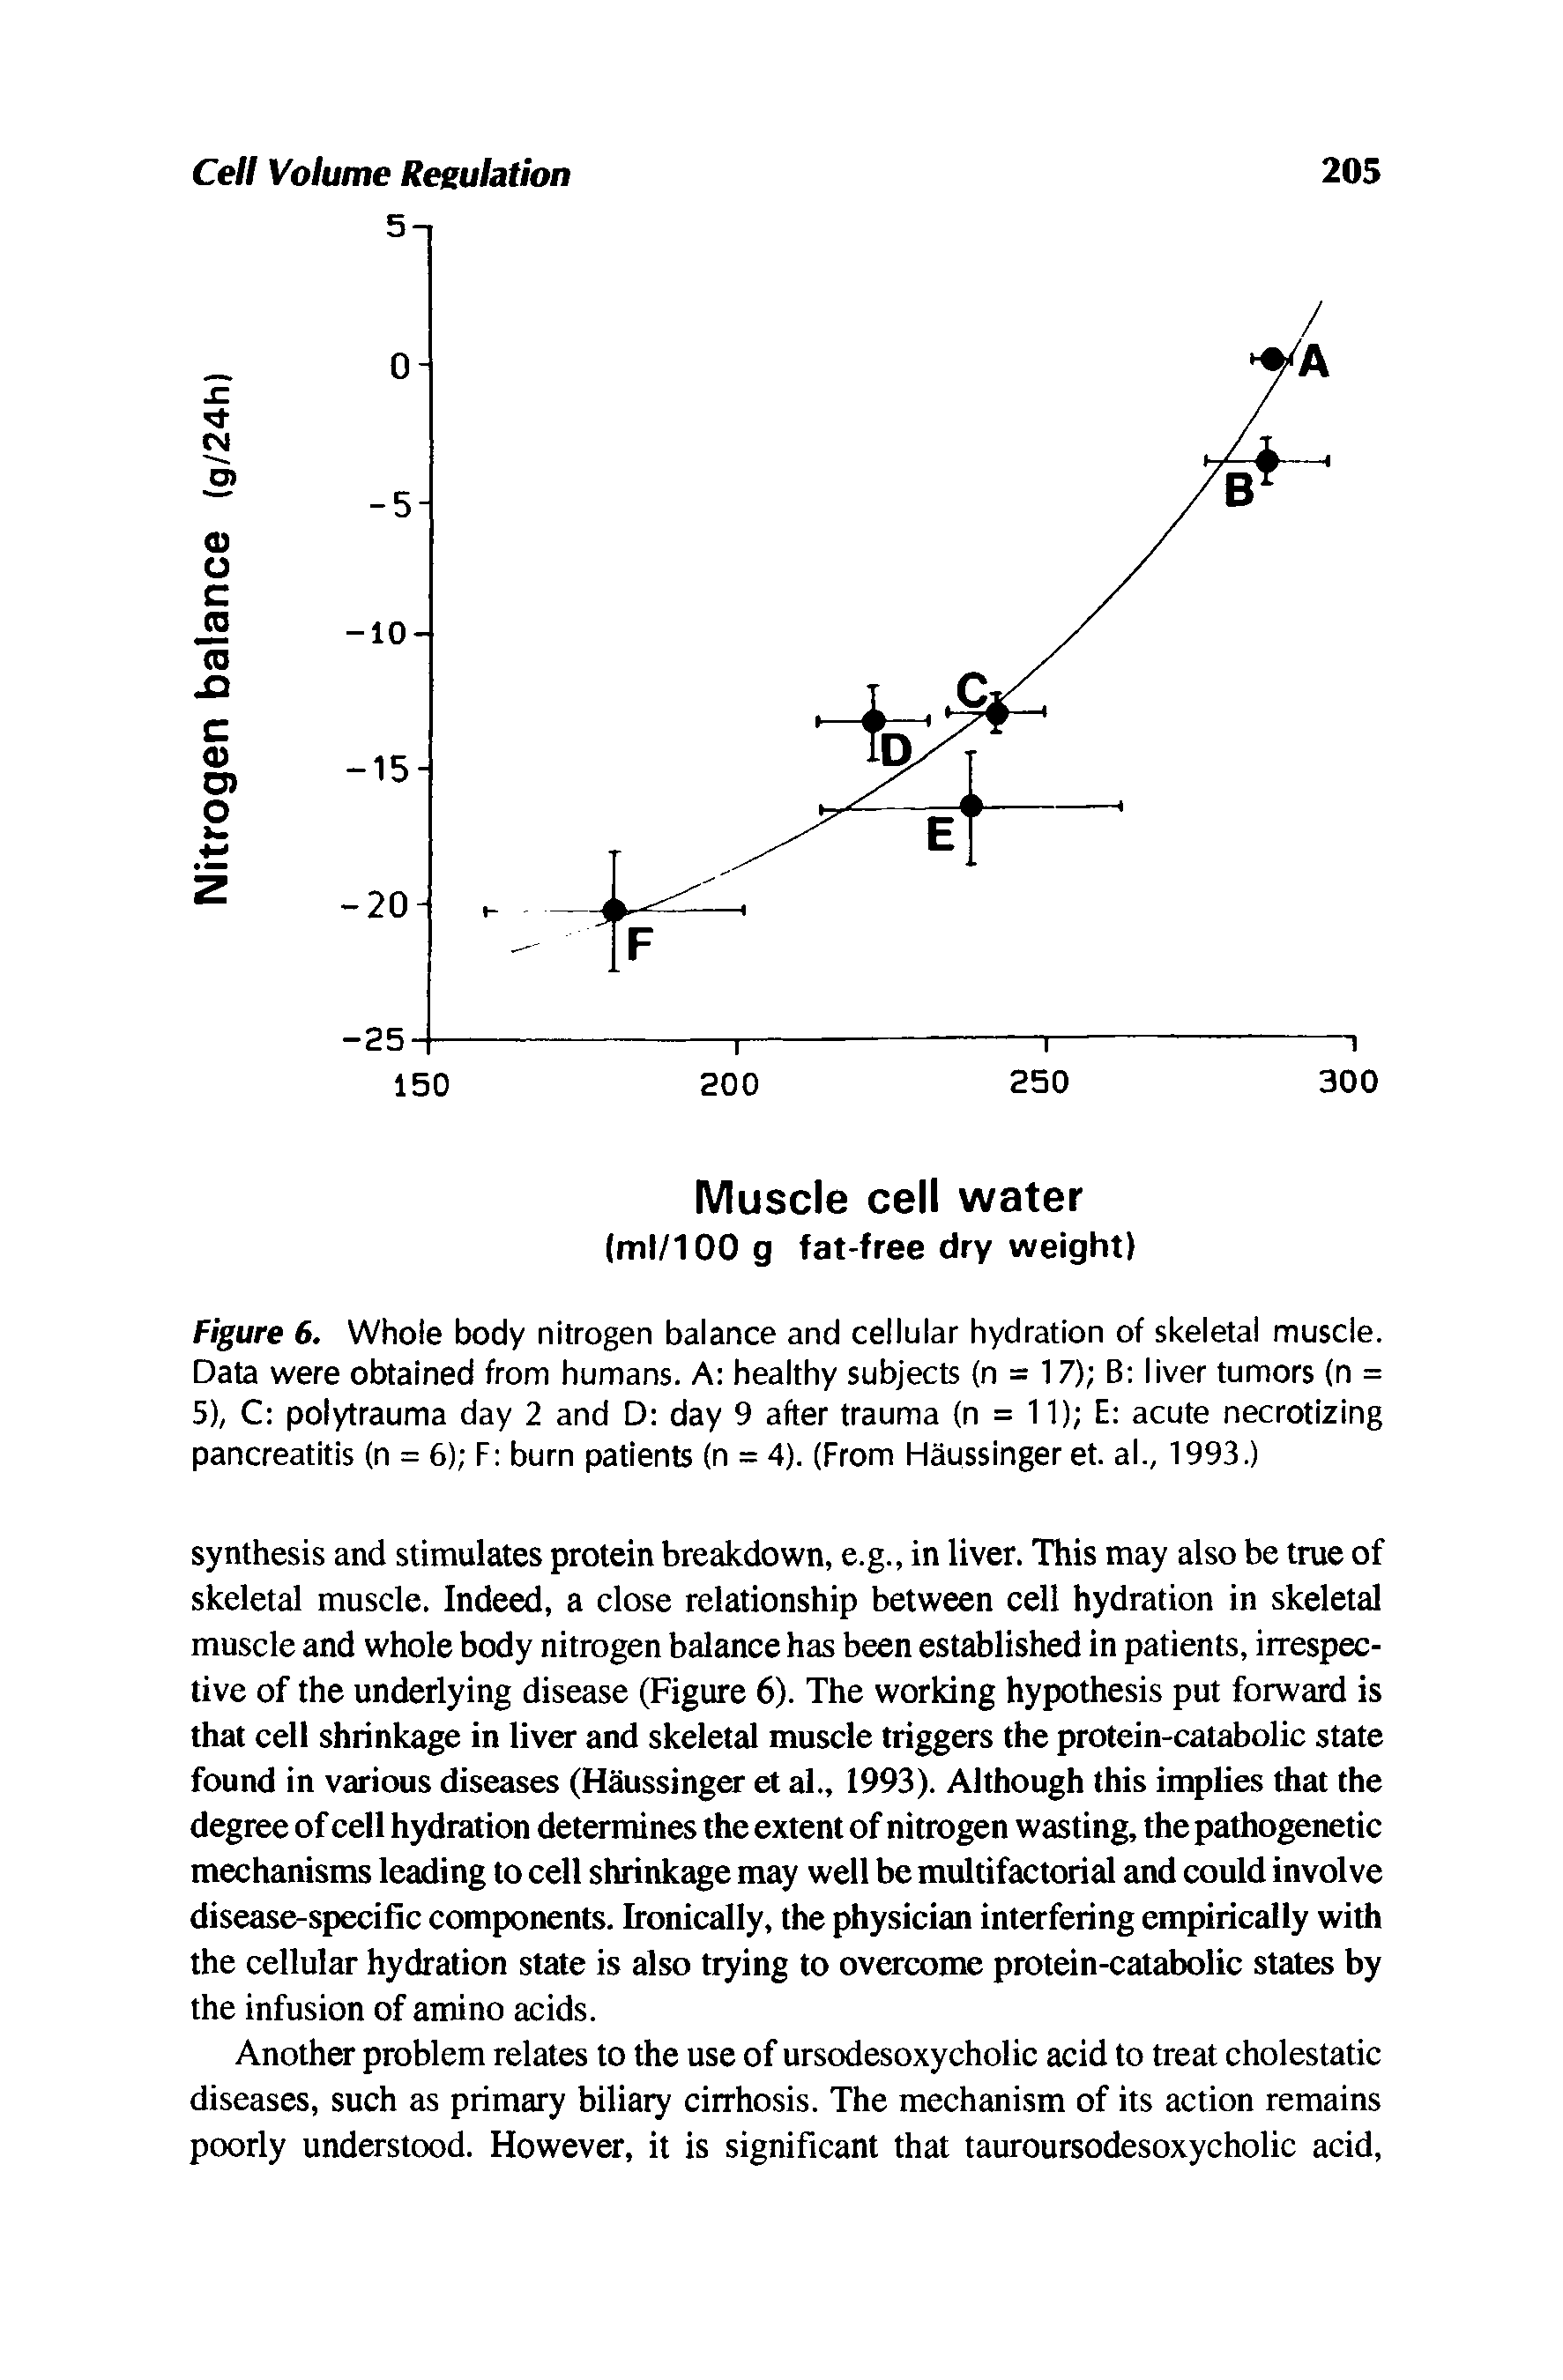 Figure 6. Whole body nitrogen balance and cellular hydration of skeletal muscle. Data were obtained from humans. A healthy subjects (n = 17) B liver tumors (n = 5), C polytrauma day 2 and D day 9 after trauma (n = 11) E acute necrotizing pancreatitis (n = 6) F burn patients (n = 4). (From Haussinger et. al., 1993.)...